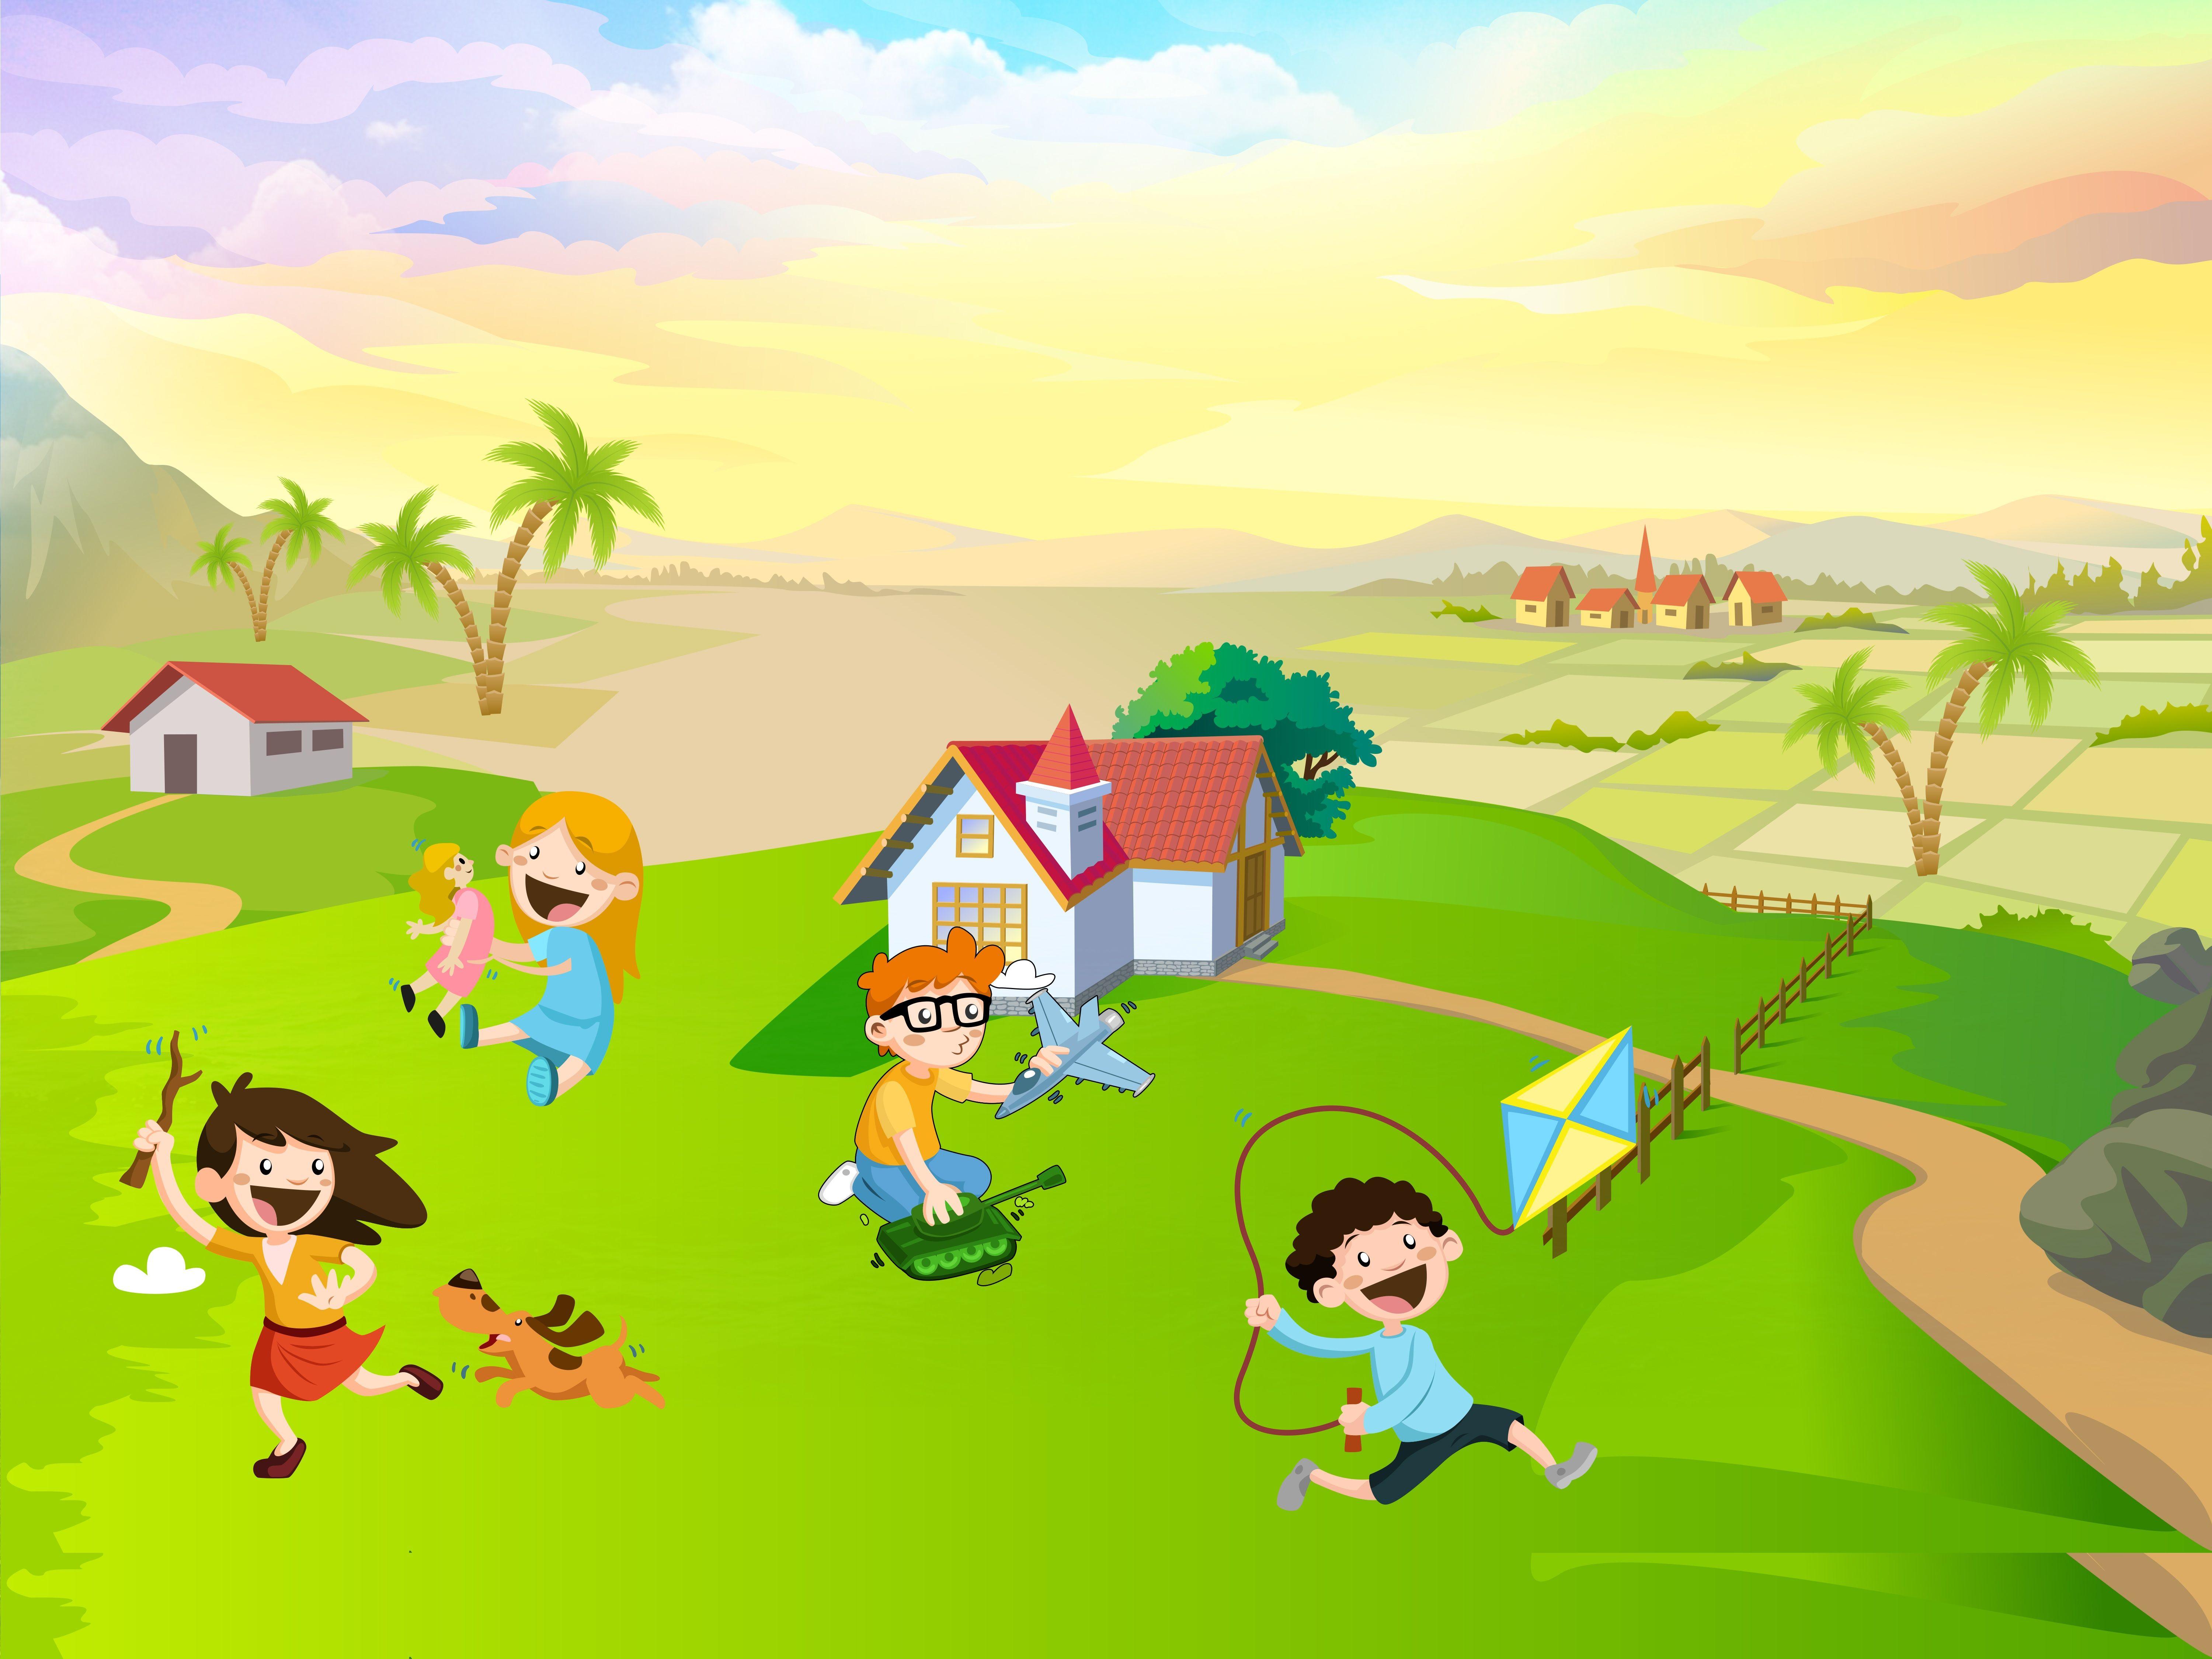 Wallpaper.wiki Kids Wallpaper With A Lage Ground And Kite PIC